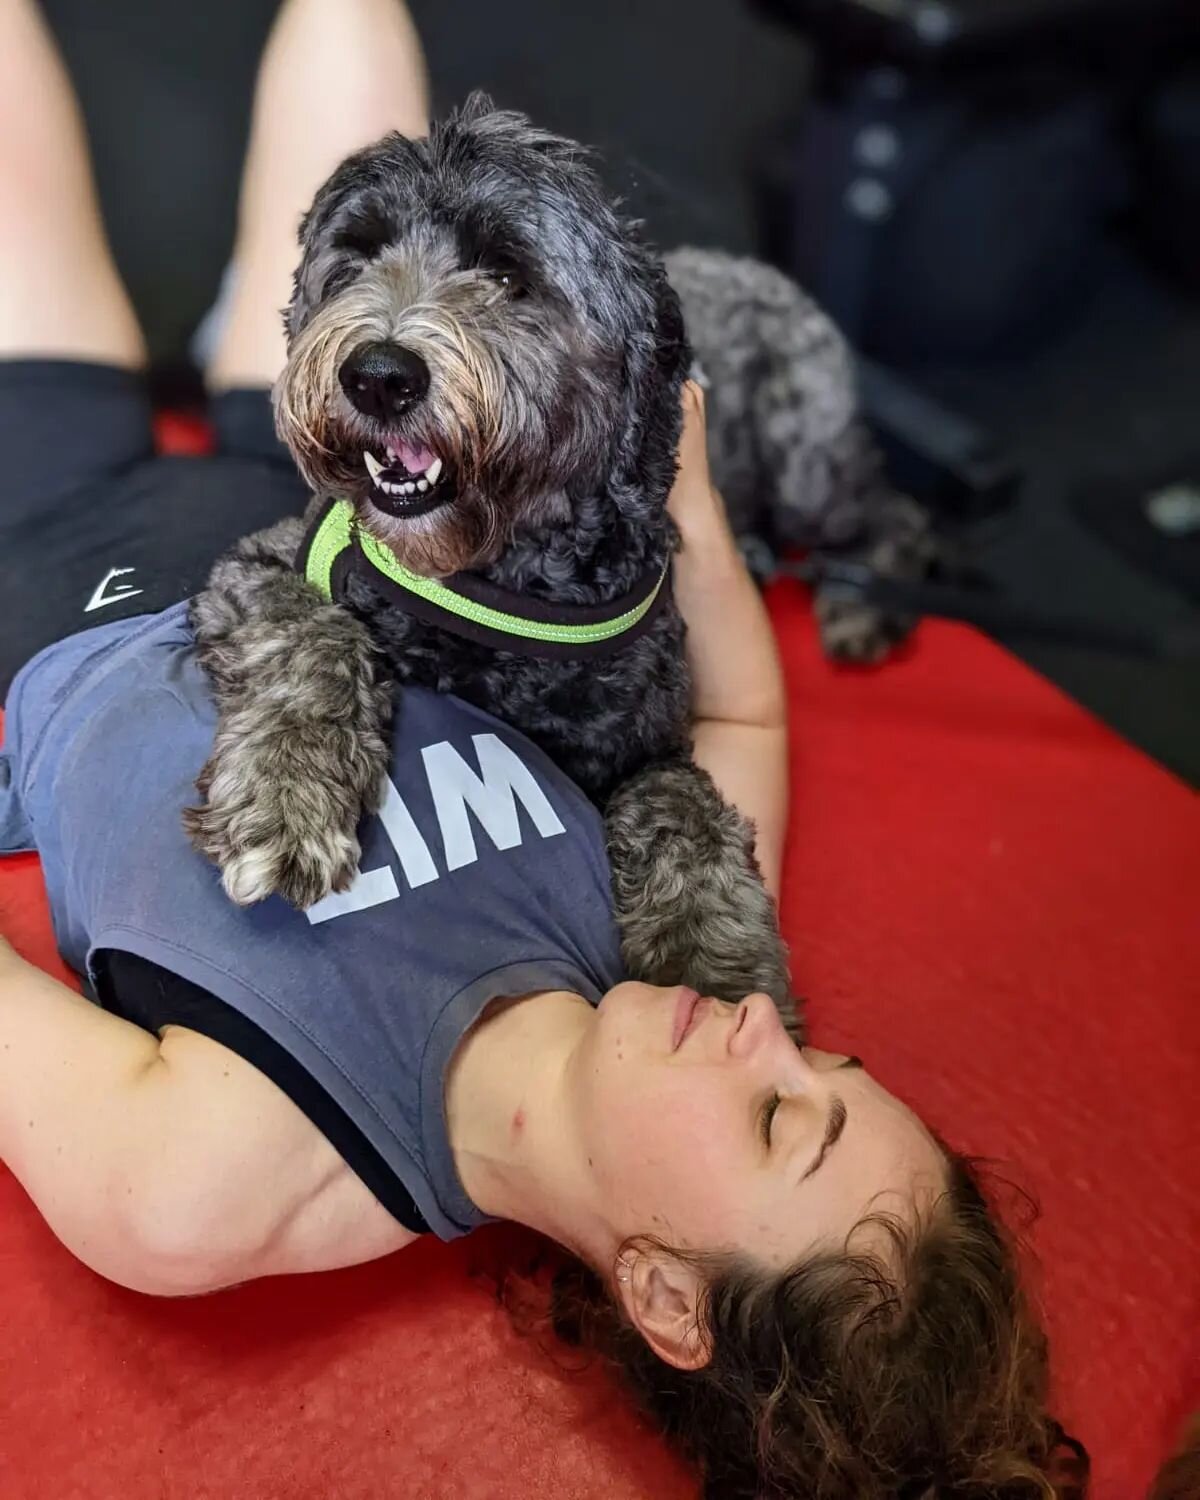 Post WOD emotional support from coach Monty 🥰 
.
.
.
#crossfitbasepoint #crossfit #dogcoach #exercise #fitness #gym #inwodwetrust #mentalhealth #teamwit #unit22fitness #workout #waterlooville @wit.fitness